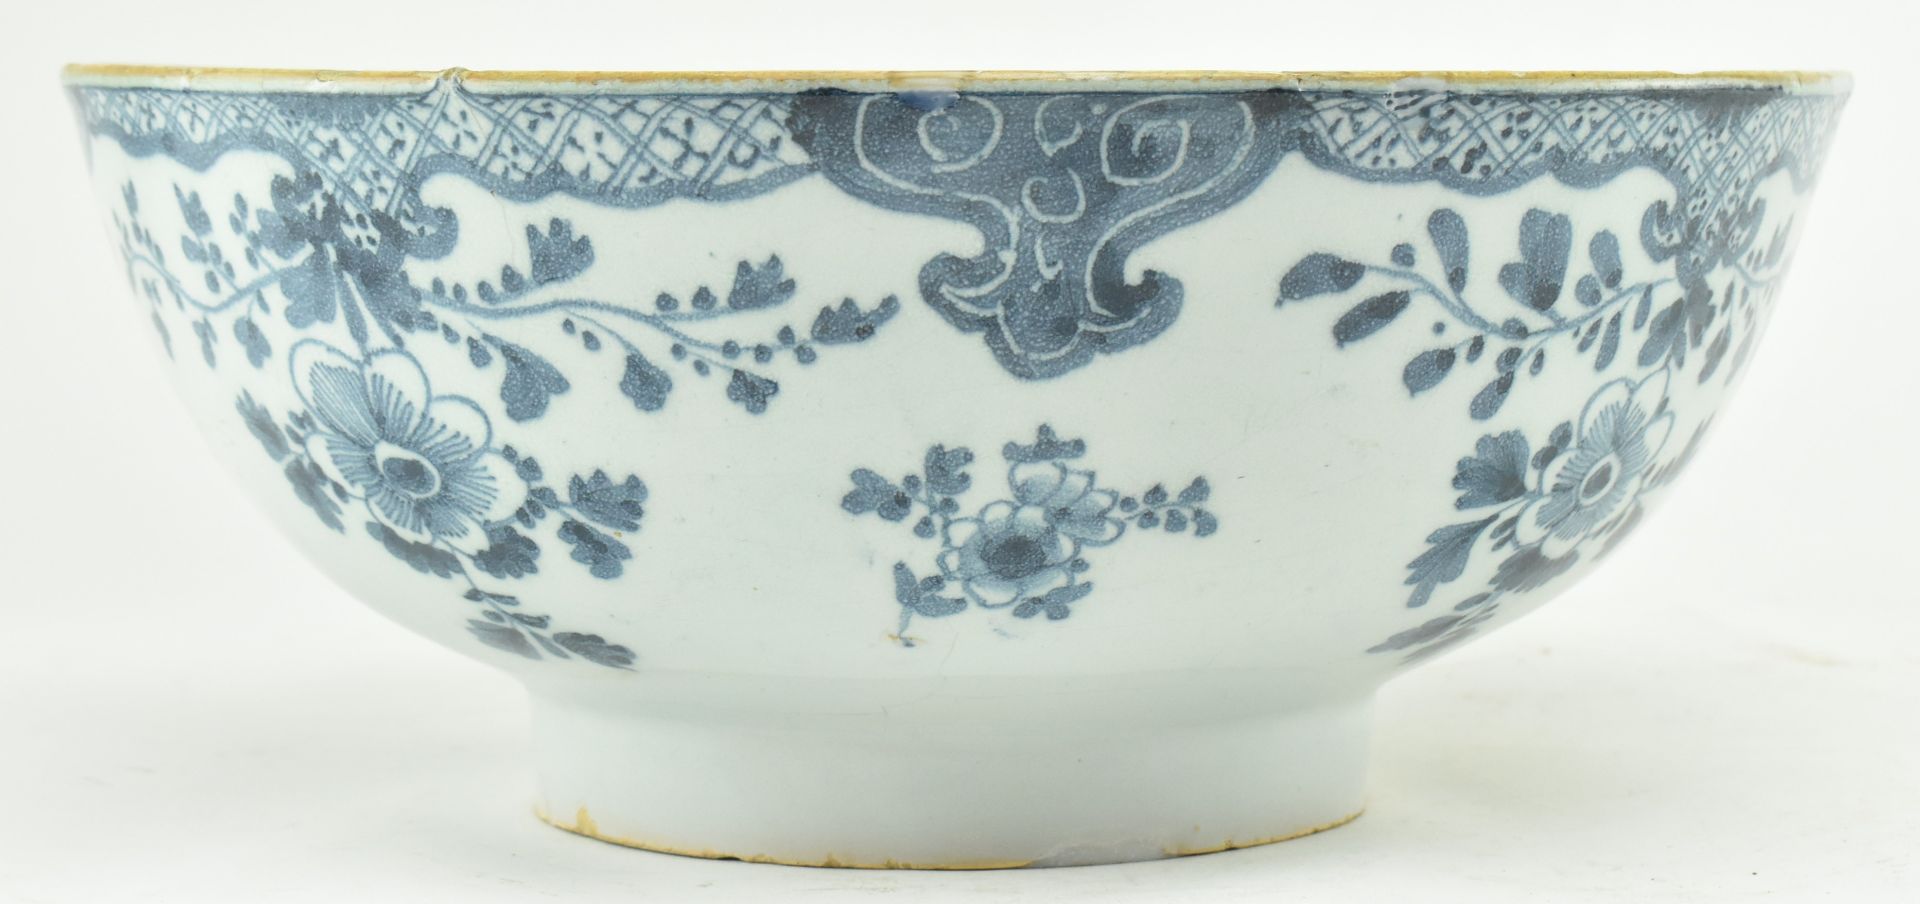 BELIEVED 18TH CENTURY ENGLISH BLUE & WHITE DELFT CERAMIC BOWL - Image 8 of 8